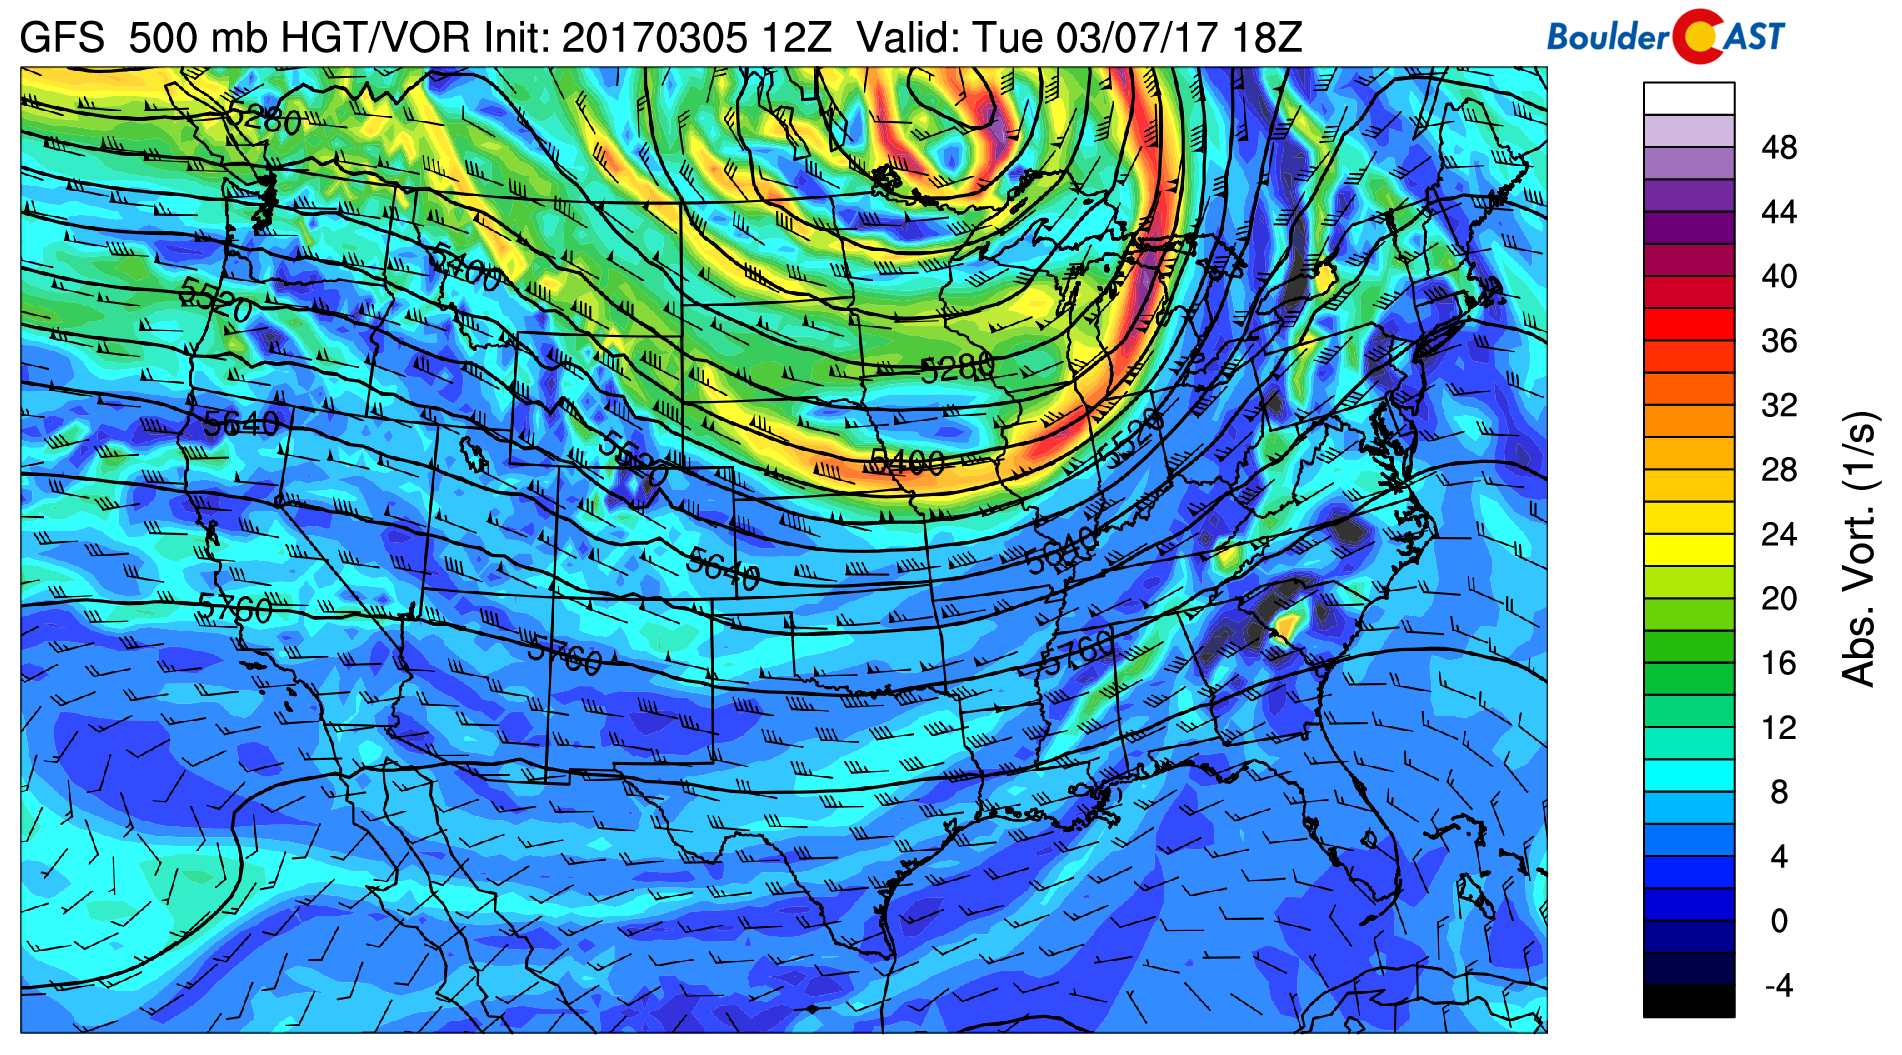 GFS 500 mb absolute vorticity for Tuesday